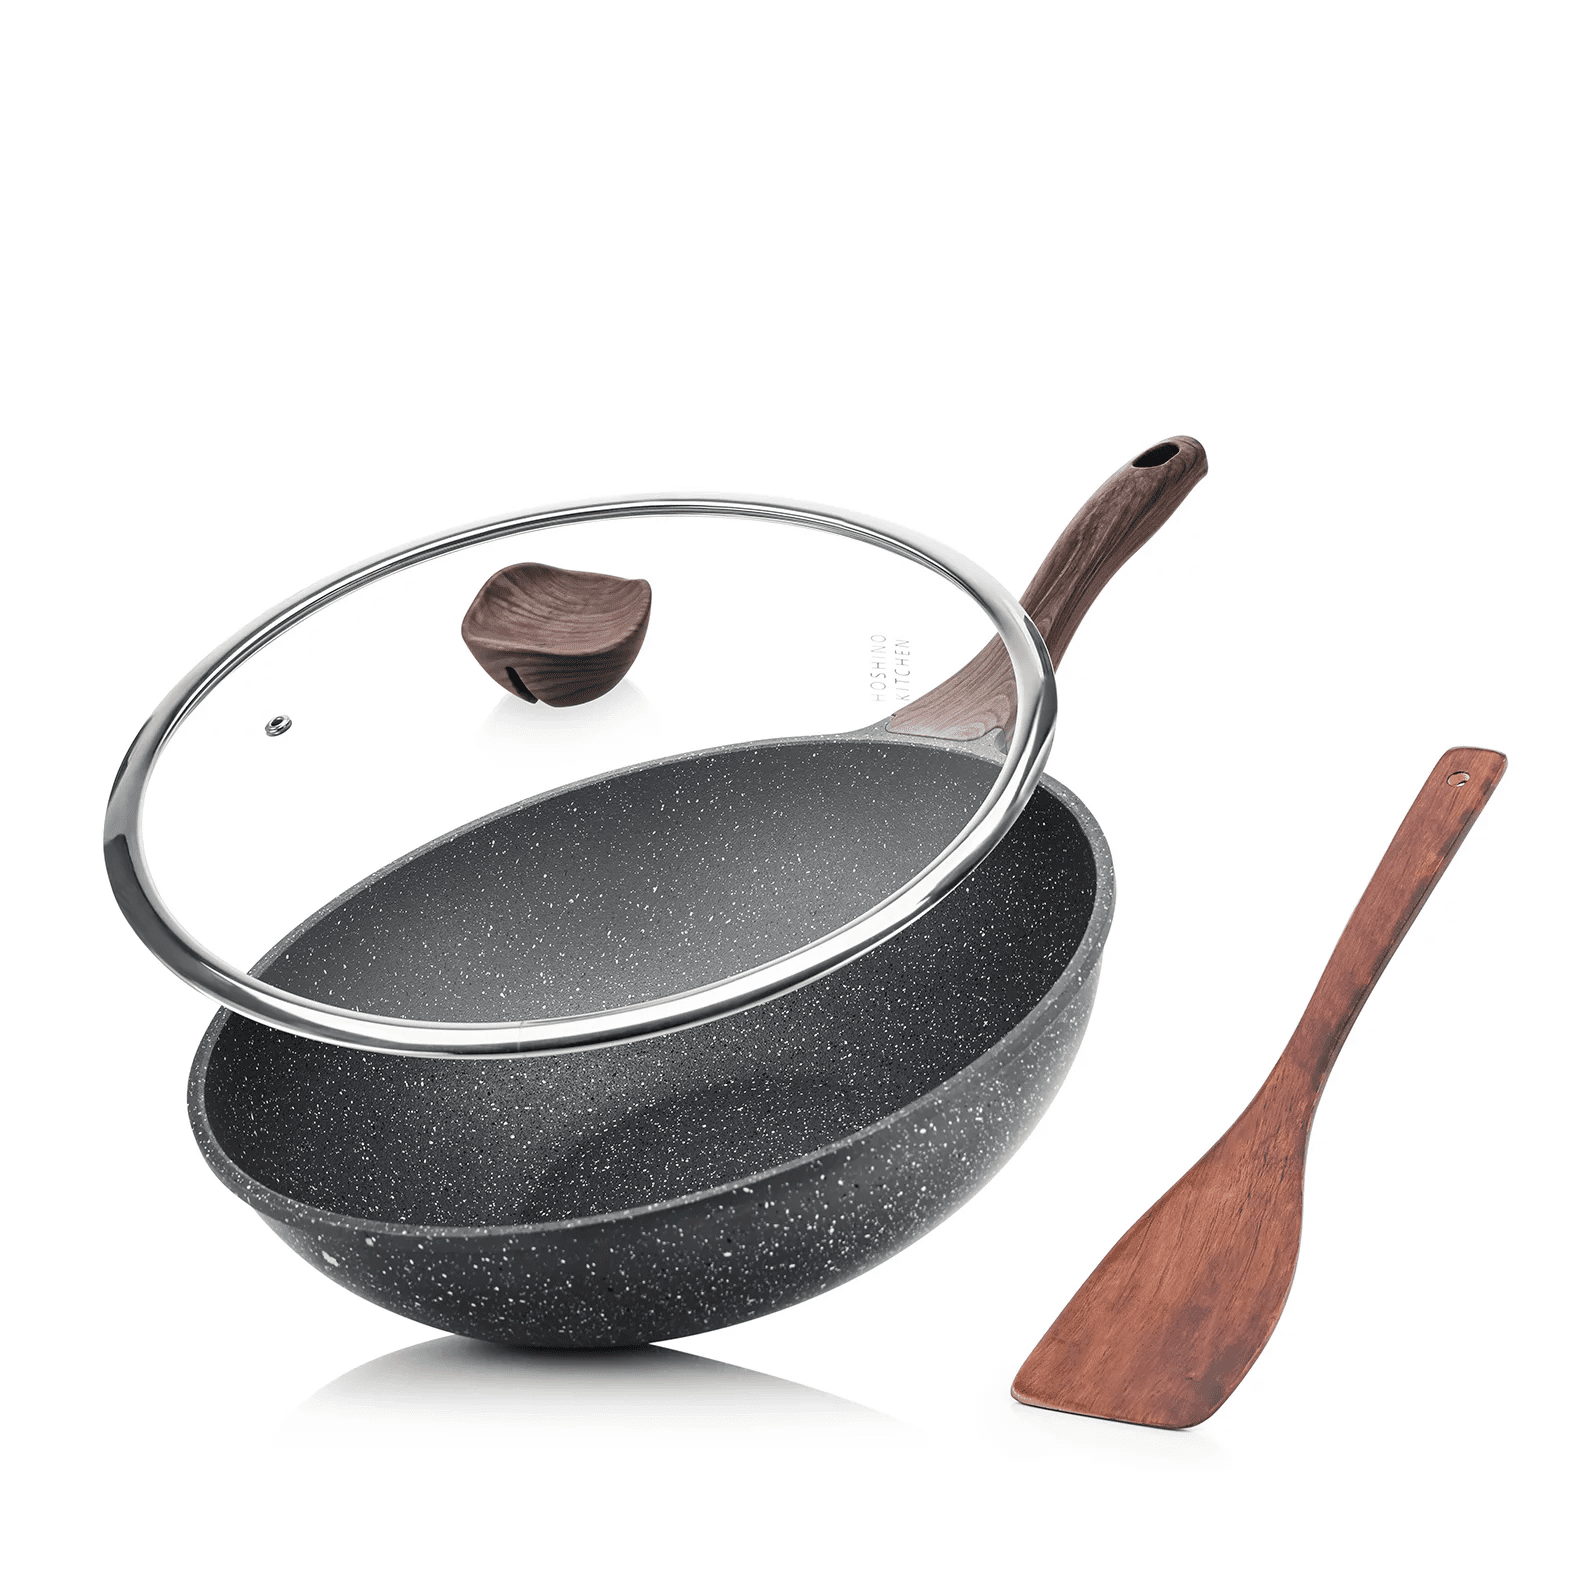 Wok Hei and the usage of a wok in home kitchens - Cookware - Hungry Onion